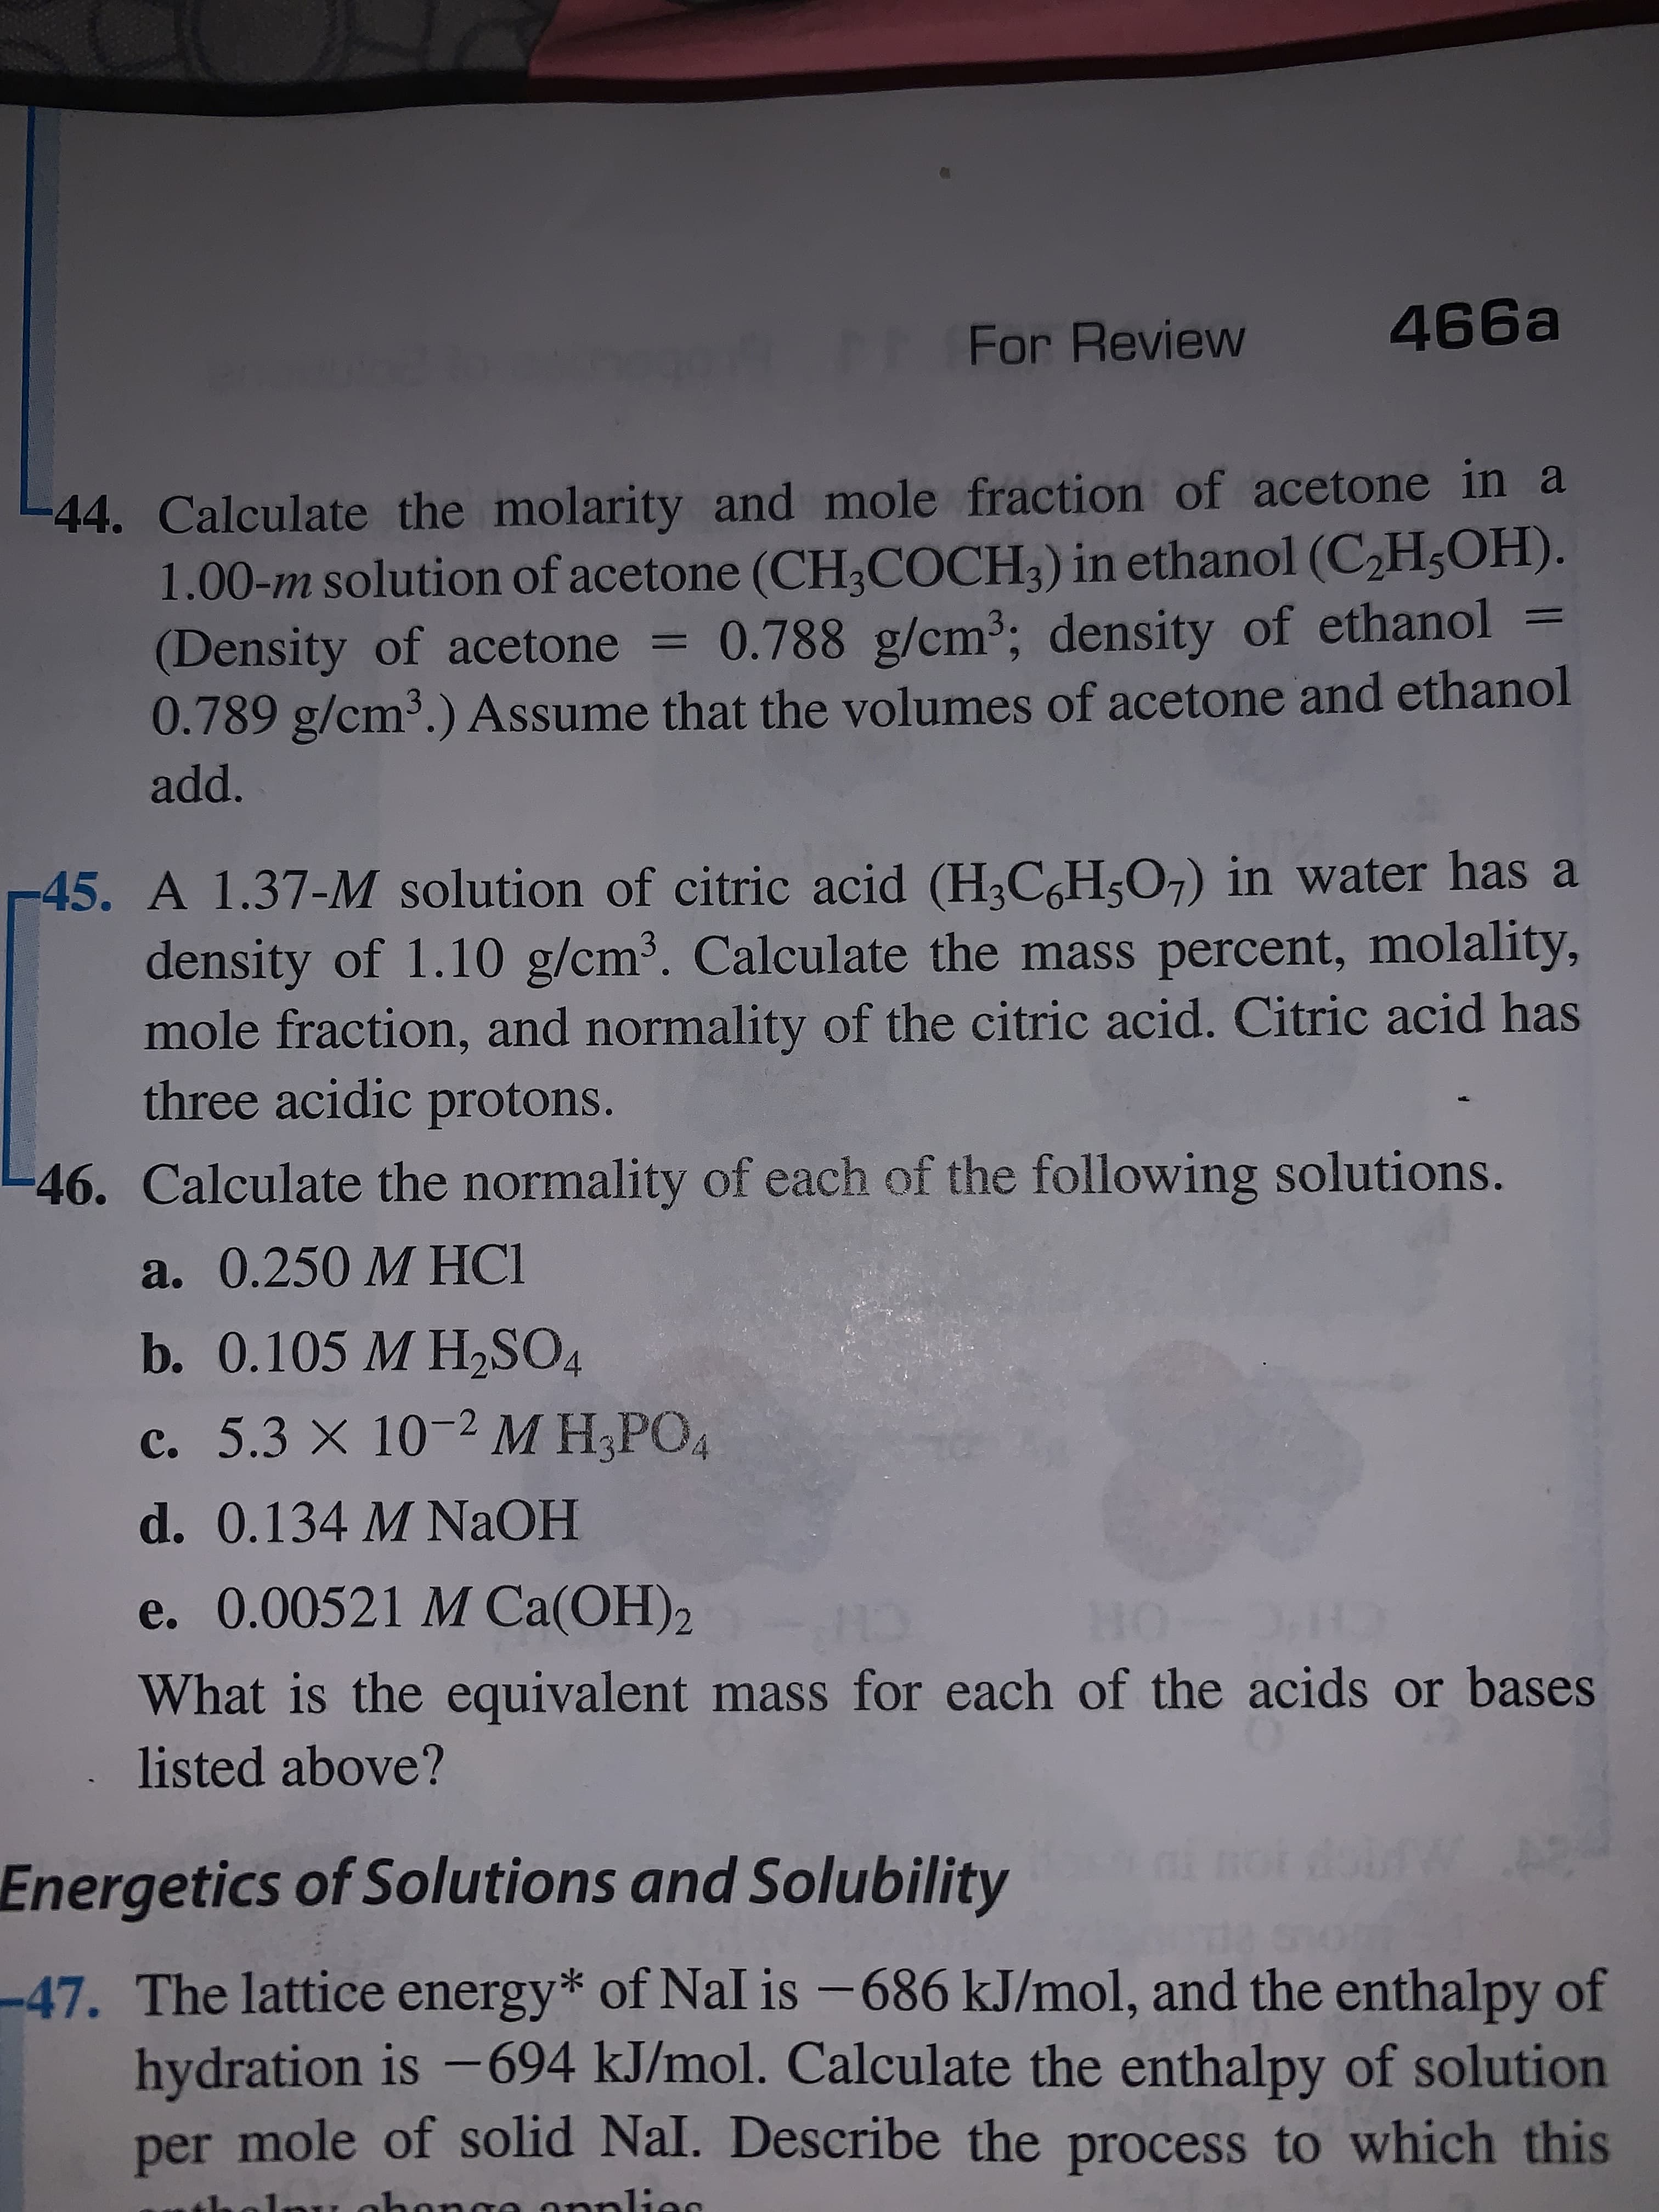 466a
For Review
44. Calculate the molarity and mole fraction of acetone in a
1.00-m solution of acetone (CH;COCH;) in ethanol (C2H5OH).
(Density of acetone = 0.788 g/cm3; density of ethanol =
0.789 g/cm³.) Assume that the volumes of acetone and ethanol
add.
45. A 1.37-M solution of citric acid (H;C,H;O,) in water has a
density of 1.10 g/cm³. Calculate the mass percent, molality,
mole fraction, and normality of the citric acid. Citric acid has
three acidic protons.
-46. Calculate the normality of each of the following solutions.
a. 0.250 M HCI
b. 0.105 M H2SO4
c. 5.3 X 10-2 M H,PO4
d. 0.134 M NaOH
e. 0.00521 M Ca(OH)2
What is the equivalent mass for each of the acids or bases
listed above?
Energetics of Solutions and Solubility
-47. The lattice energy* of NaI is -686 kJ/mol, and the enthalpy of
hydration is -694 kJ/mol. Calculate the enthalpy of solution
per mole of solid Nal. Describe the process to which this
1nu ohon
applies
